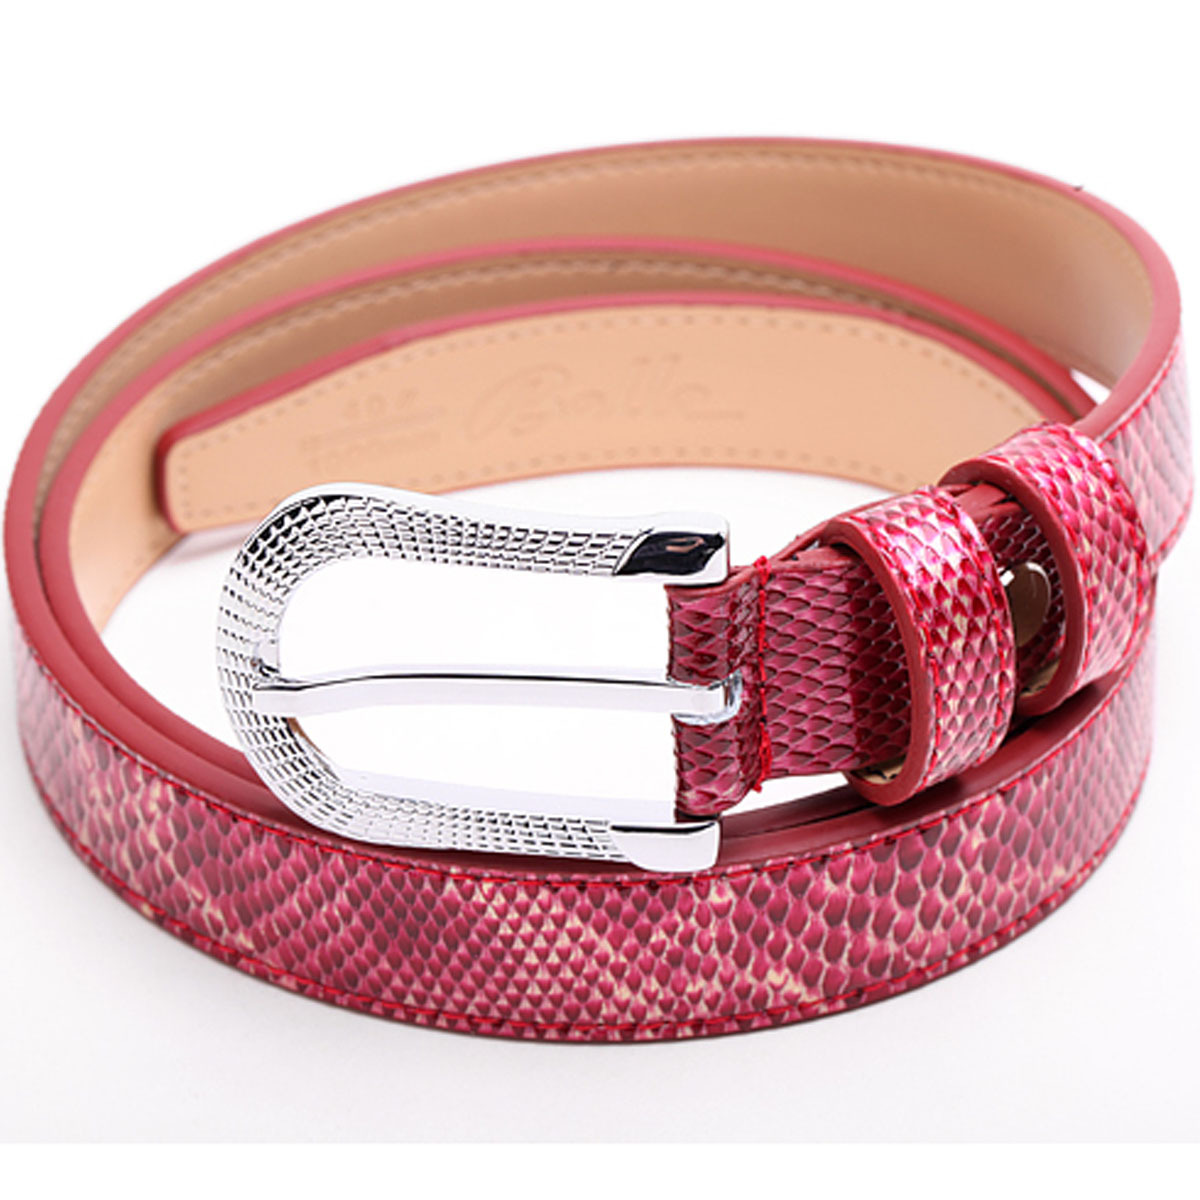 only wholesale belts fashion strap genuine leather cowhide women's strap classic red snakeskin f0826 100% genuine leather belt